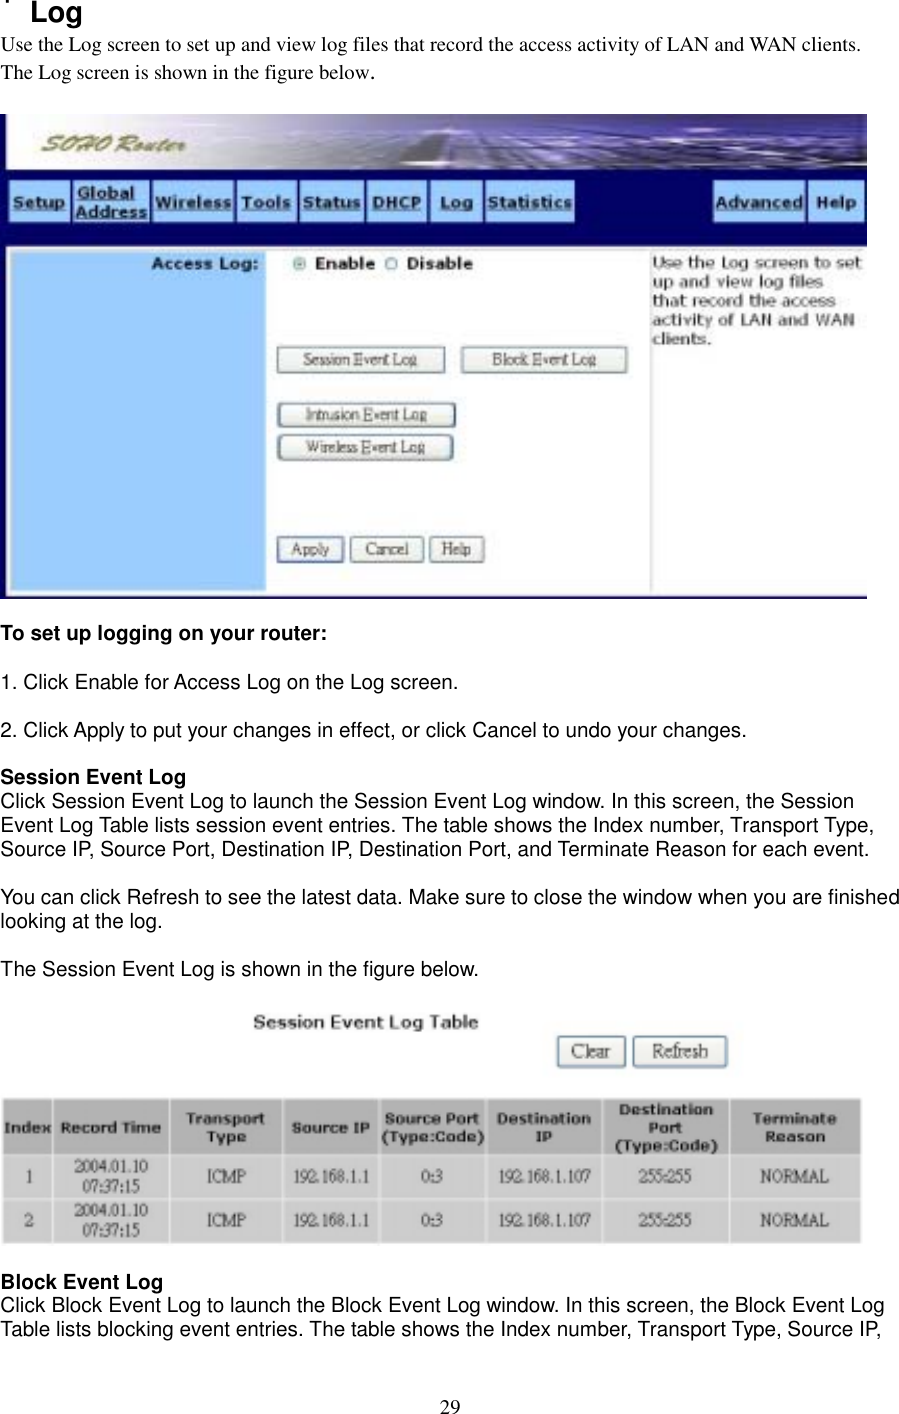  29˙Log Use the Log screen to set up and view log files that record the access activity of LAN and WAN clients.   The Log screen is shown in the figure below.    To set up logging on your router:  1. Click Enable for Access Log on the Log screen.  2. Click Apply to put your changes in effect, or click Cancel to undo your changes.  Session Event Log Click Session Event Log to launch the Session Event Log window. In this screen, the Session Event Log Table lists session event entries. The table shows the Index number, Transport Type, Source IP, Source Port, Destination IP, Destination Port, and Terminate Reason for each event.    You can click Refresh to see the latest data. Make sure to close the window when you are finished looking at the log.  The Session Event Log is shown in the figure below.    Block Event Log Click Block Event Log to launch the Block Event Log window. In this screen, the Block Event Log Table lists blocking event entries. The table shows the Index number, Transport Type, Source IP, 